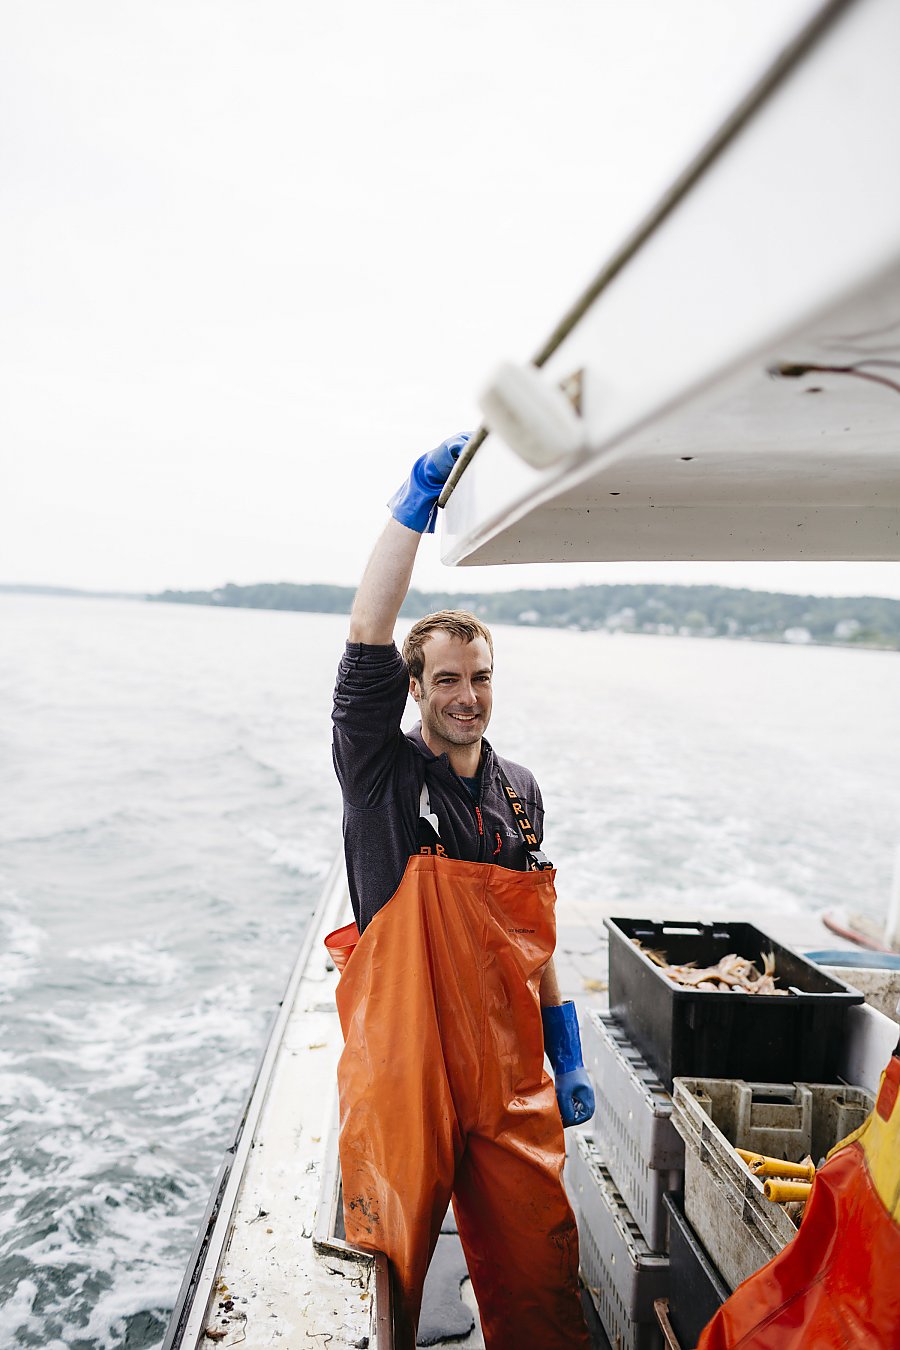 Chef Barton Seaver on a fishing boat with orange waders and blue gloves.